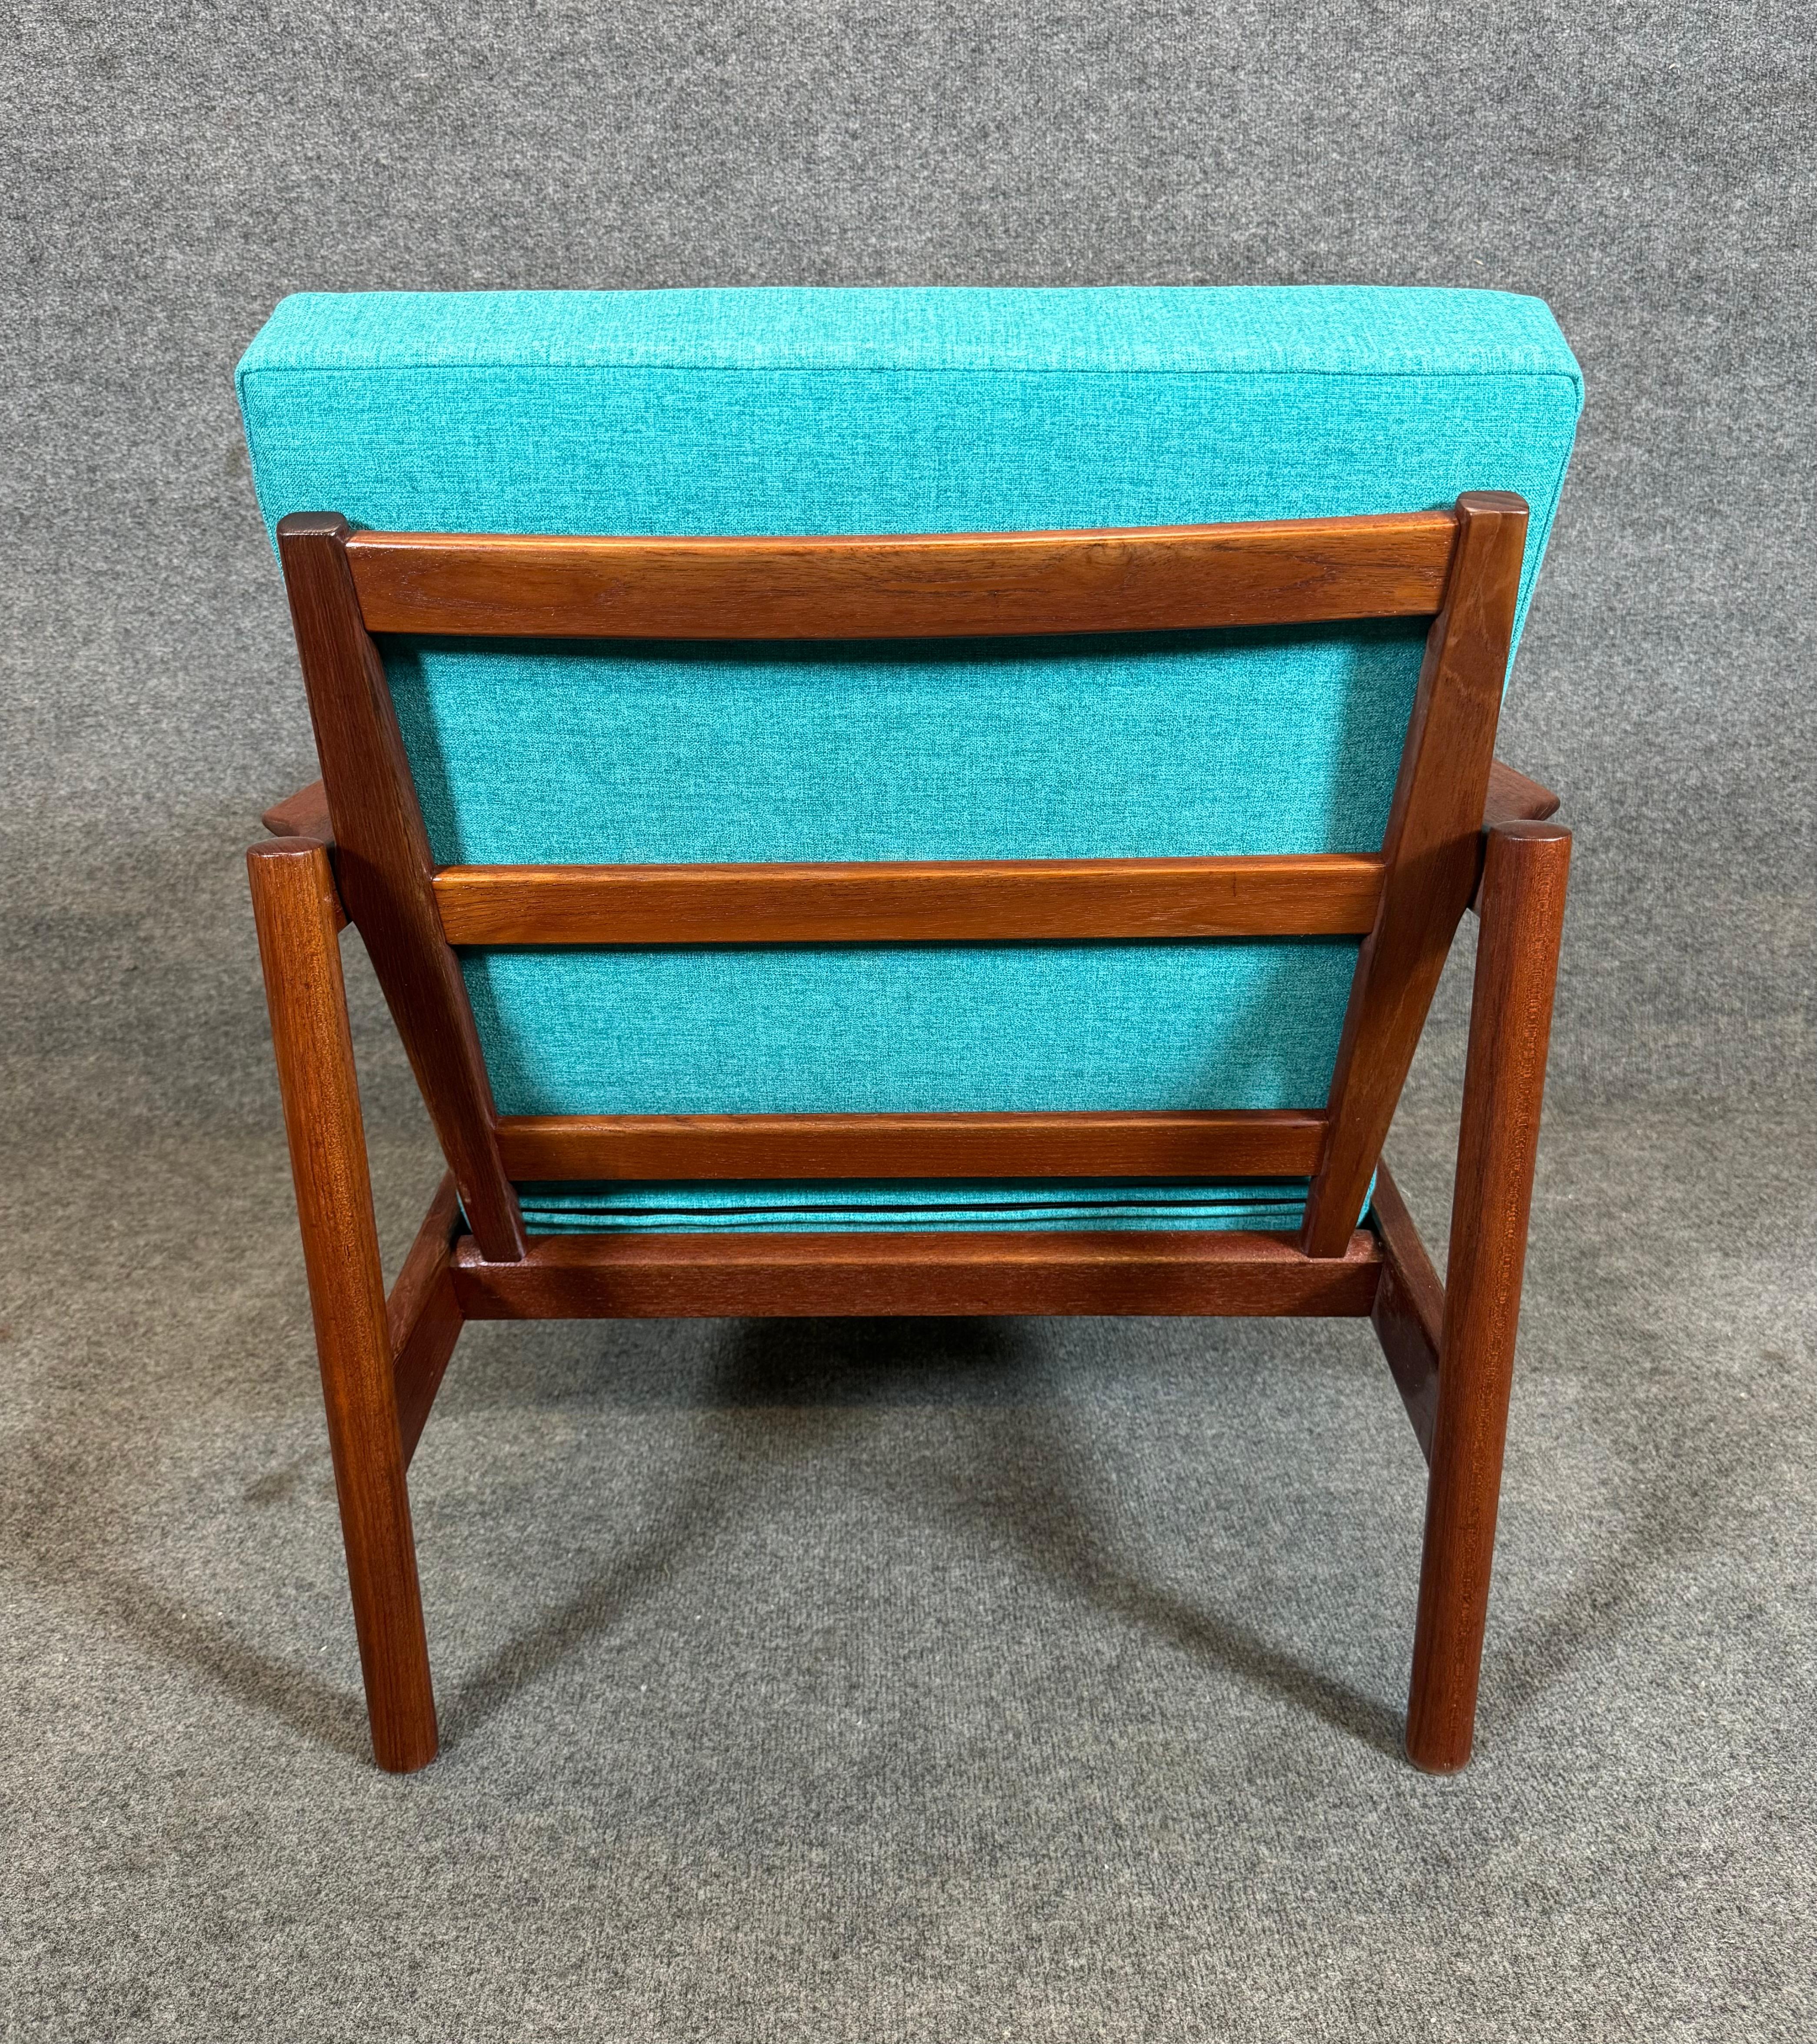 Here is a beautiful scandinavian modern easy chair in teak Model KK161 designed by Kai Kristiansen and manufactured by Magnus Olesen Mobelfabrik in Denmark in the 1960's.
This comfortable lounge chair, recently imported from Europe to California